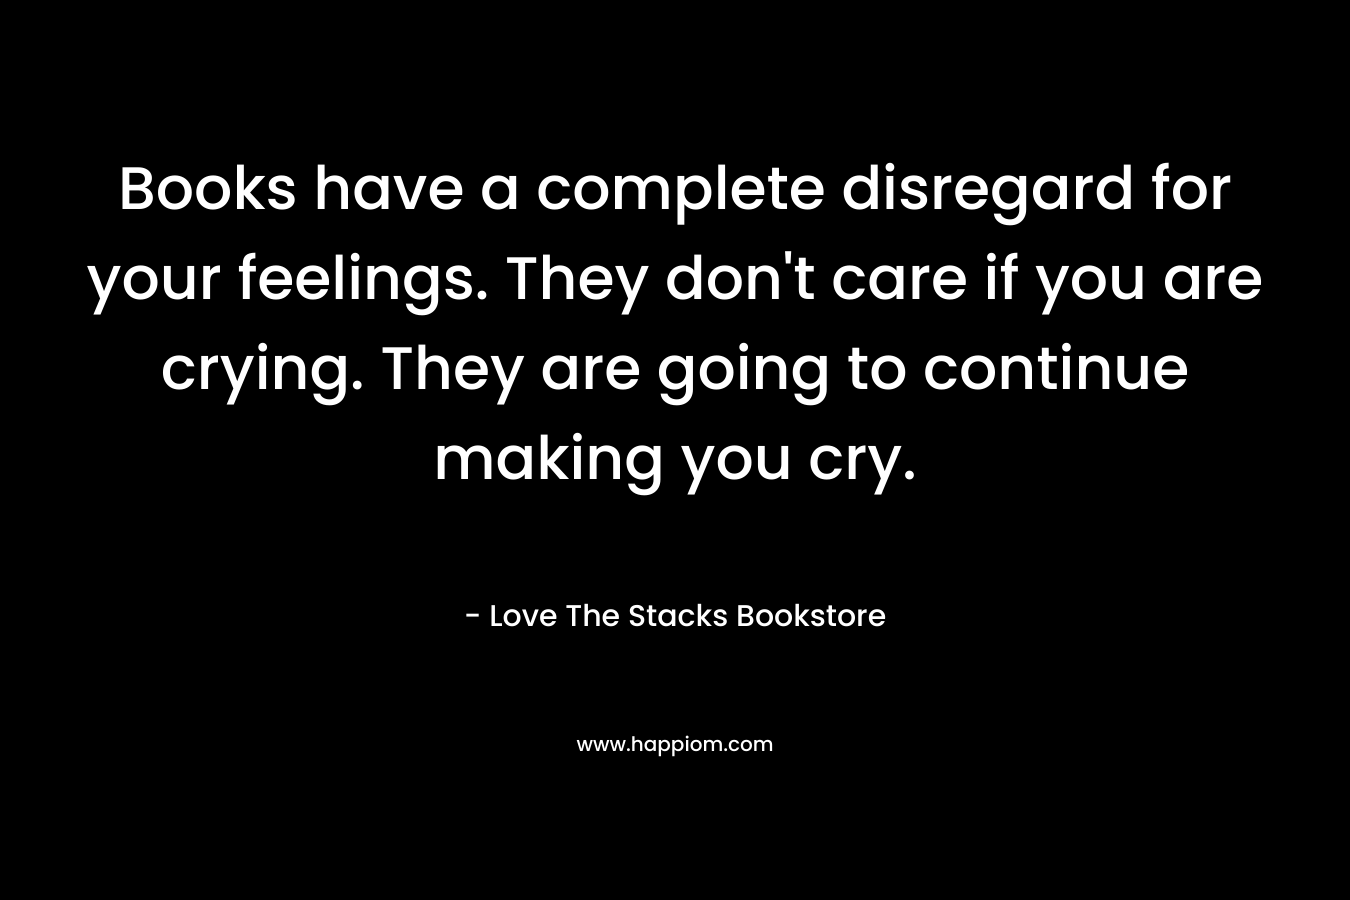 Books have a complete disregard for your feelings. They don't care if you are crying. They are going to continue making you cry.